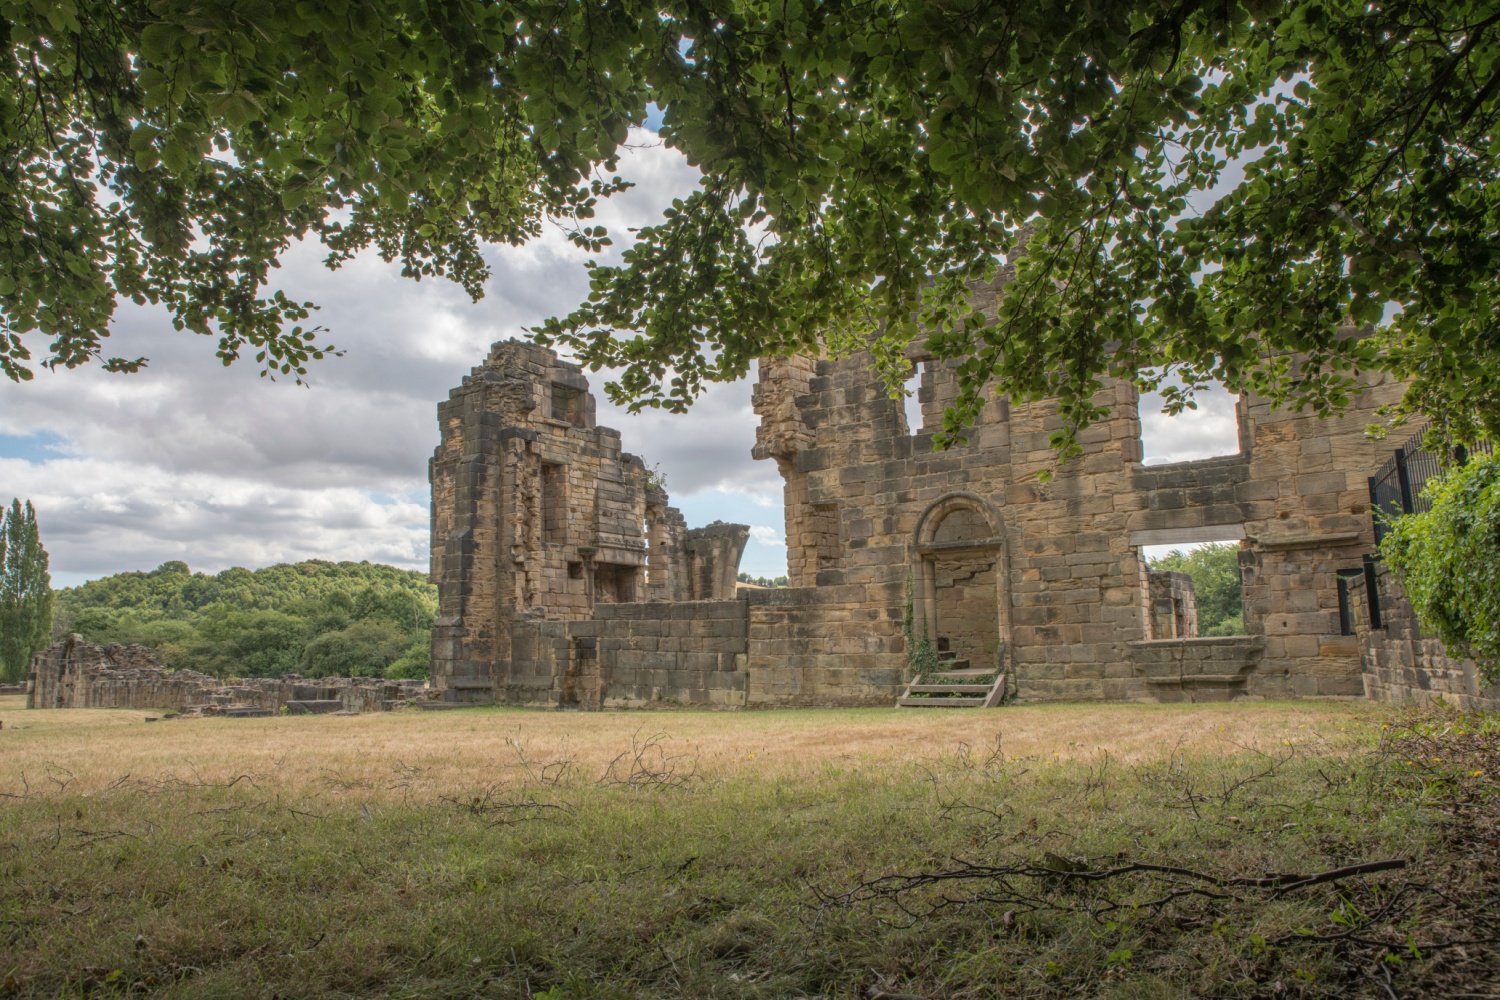 Image name monk bretton priory barnsley south yorkshire the 8 image from the post A look at the history of Monk Bretton Priory, Barnsley, with Dr Emma Wells in Yorkshire.com.